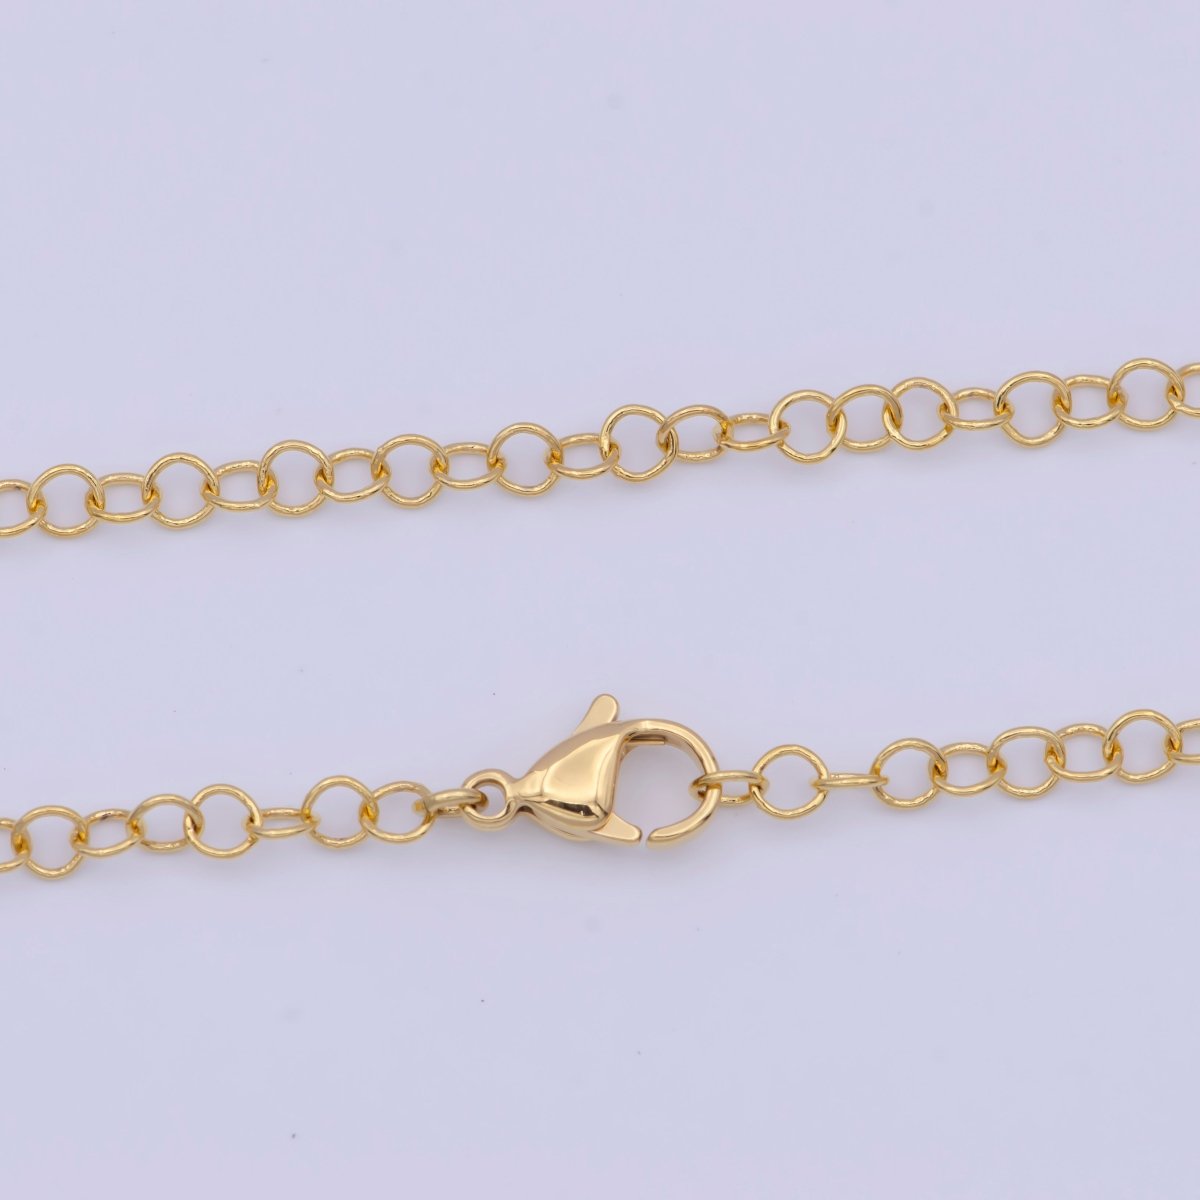 17" Ready to Wear Gold Filled Chain with Lobster Clasp, Simple Everyday Layering Necklace | WA-1119 Clearance Pricing - DLUXCA